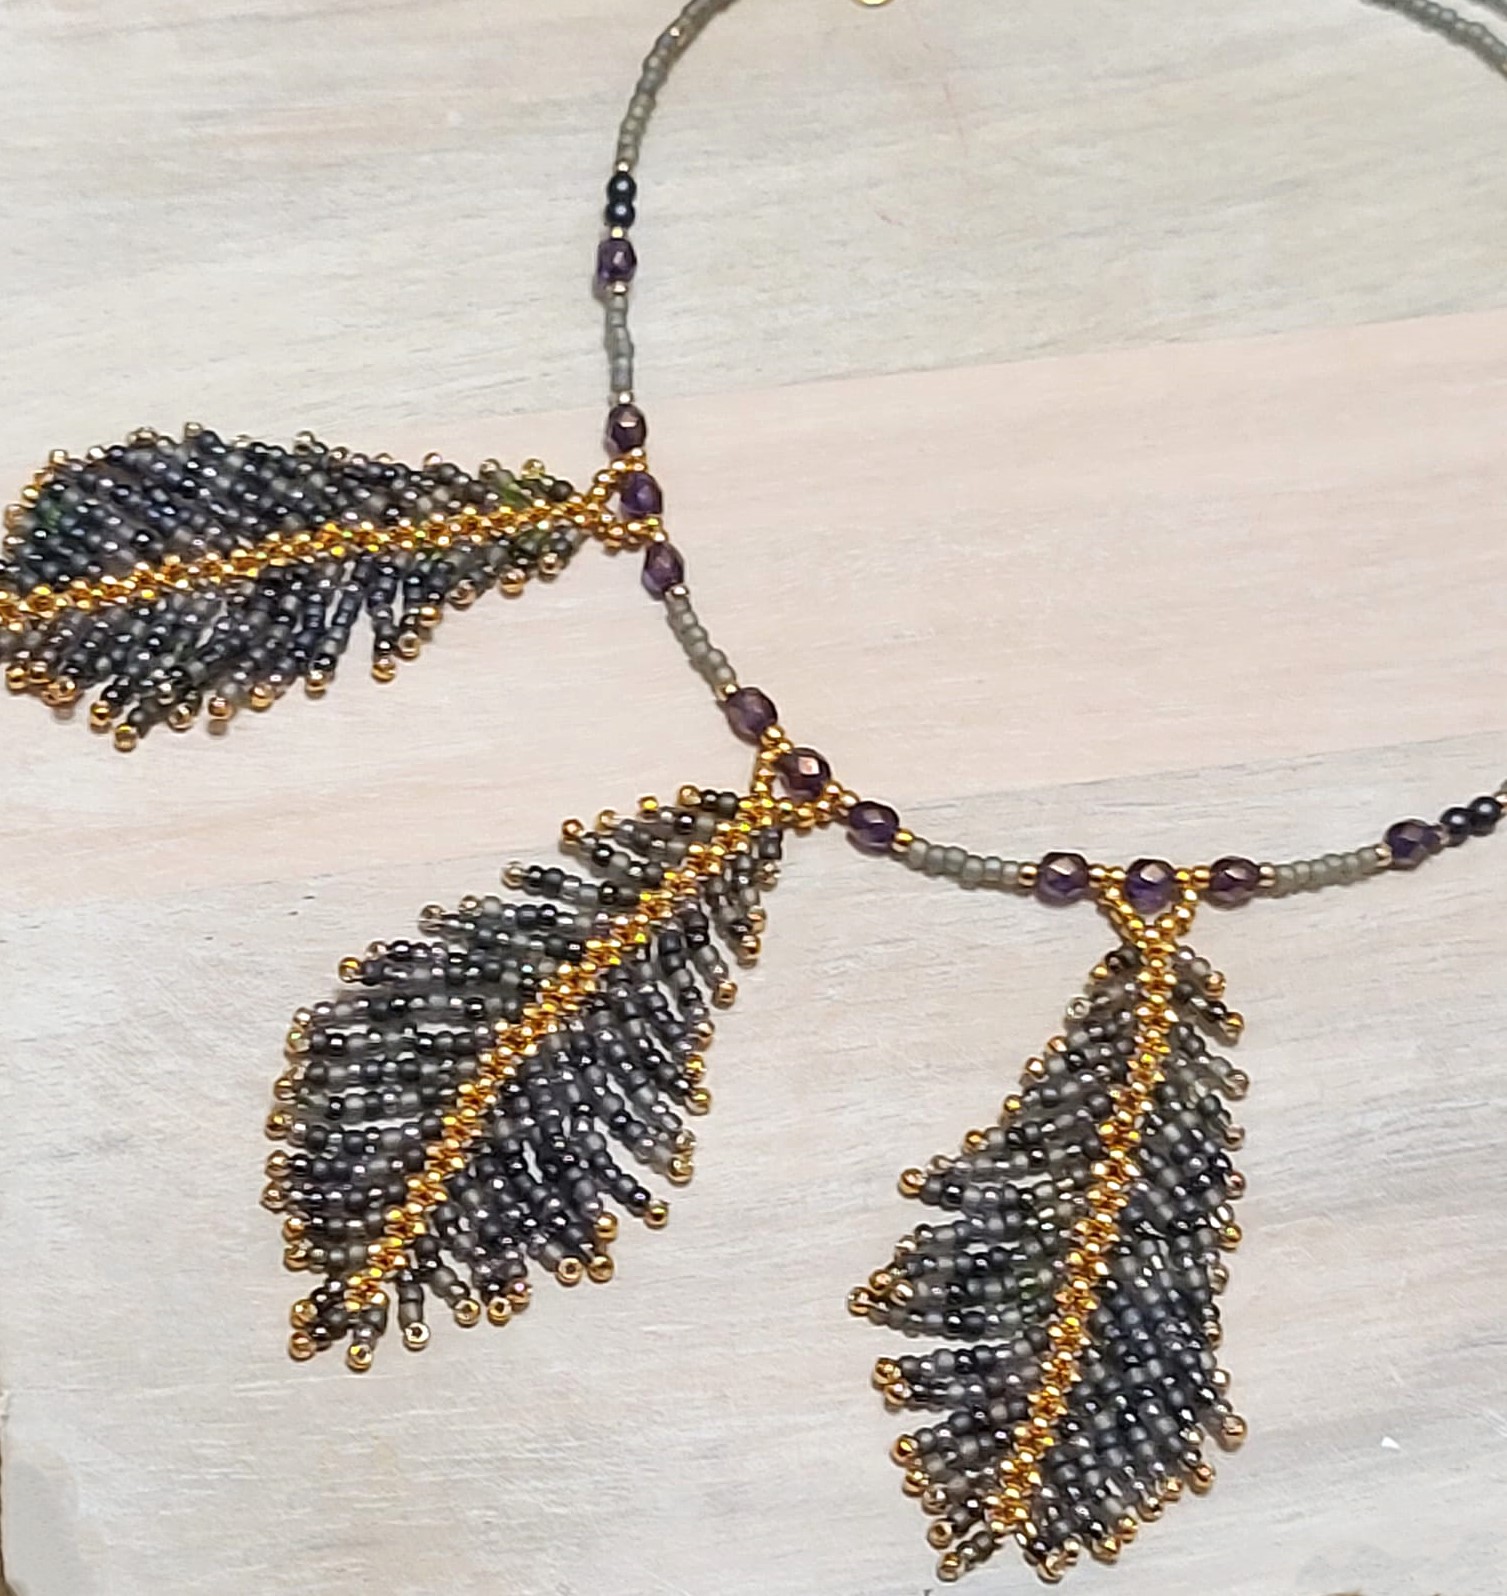 Feather necklace, handcrafted miyuki glass and crystals